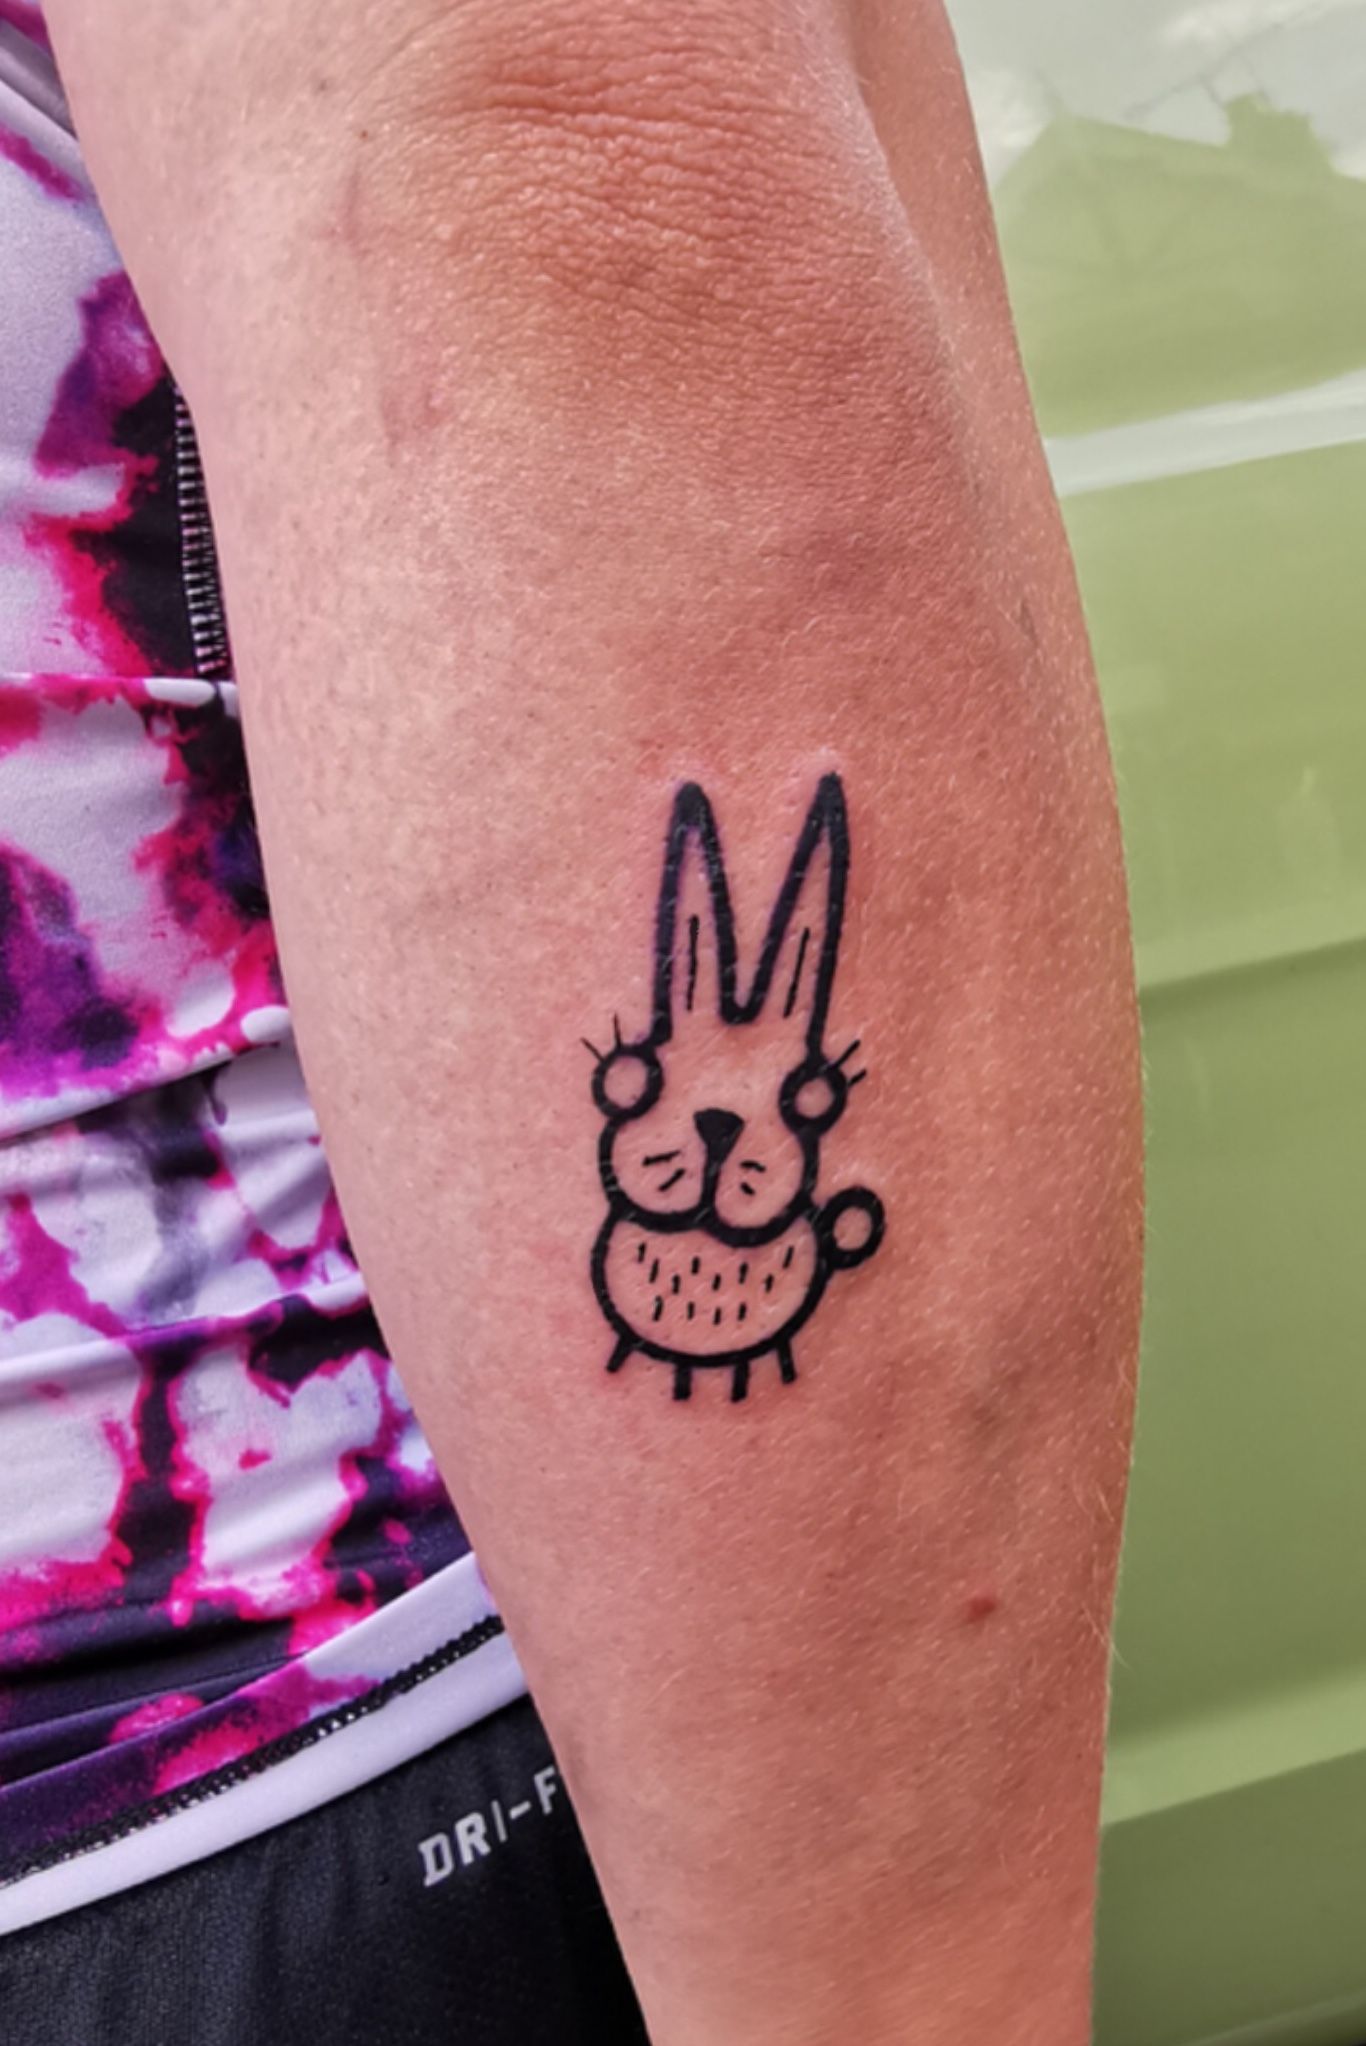 10 Best Easter Tattoo Ideas Top Ideas For Easter Tattoos  MrInkwells